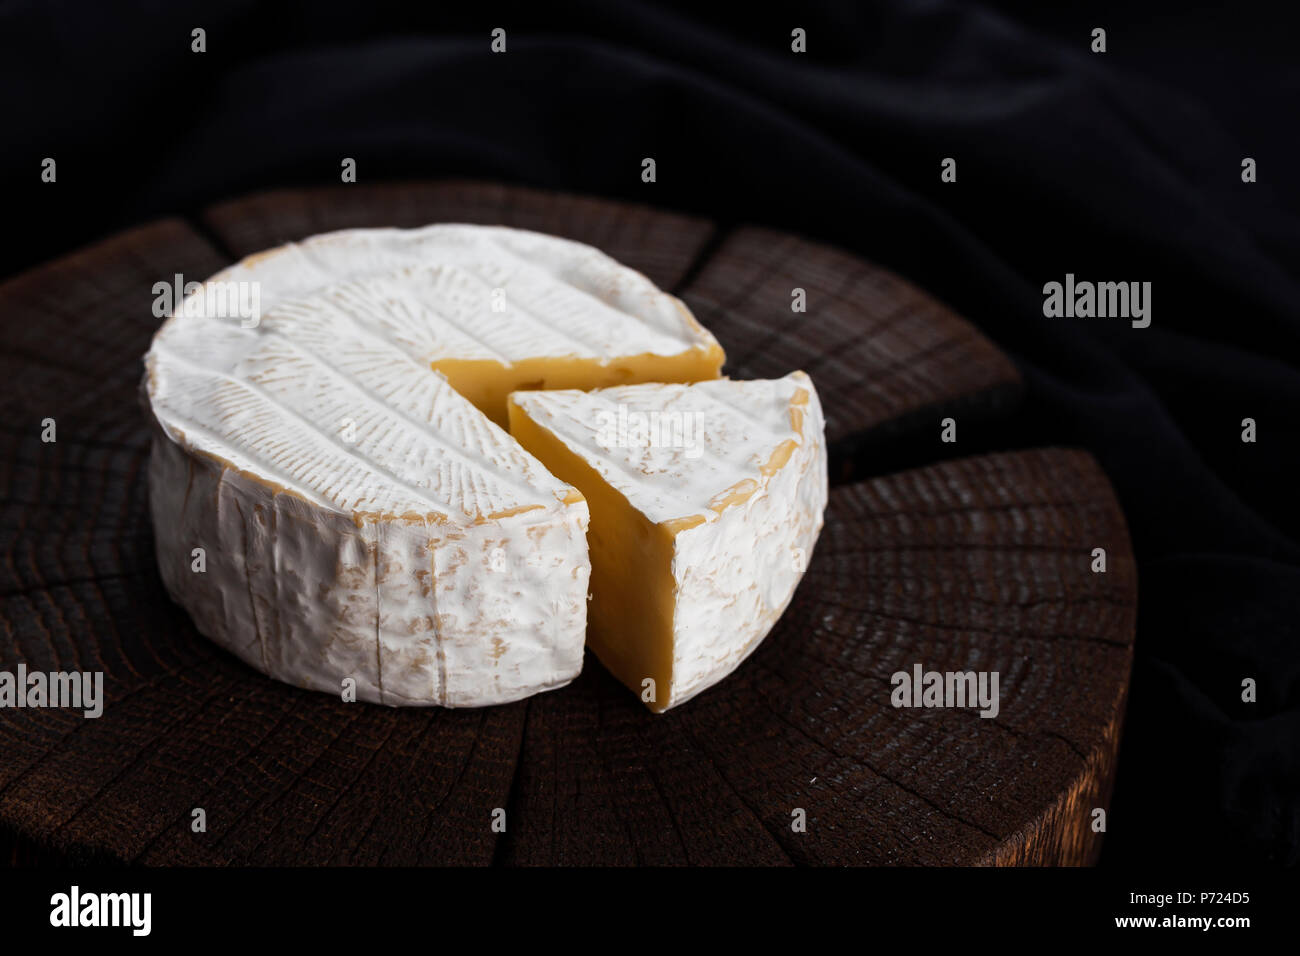 Camembert cheese on black wooden background, with copy space. Shallow depth of field Stock Photo